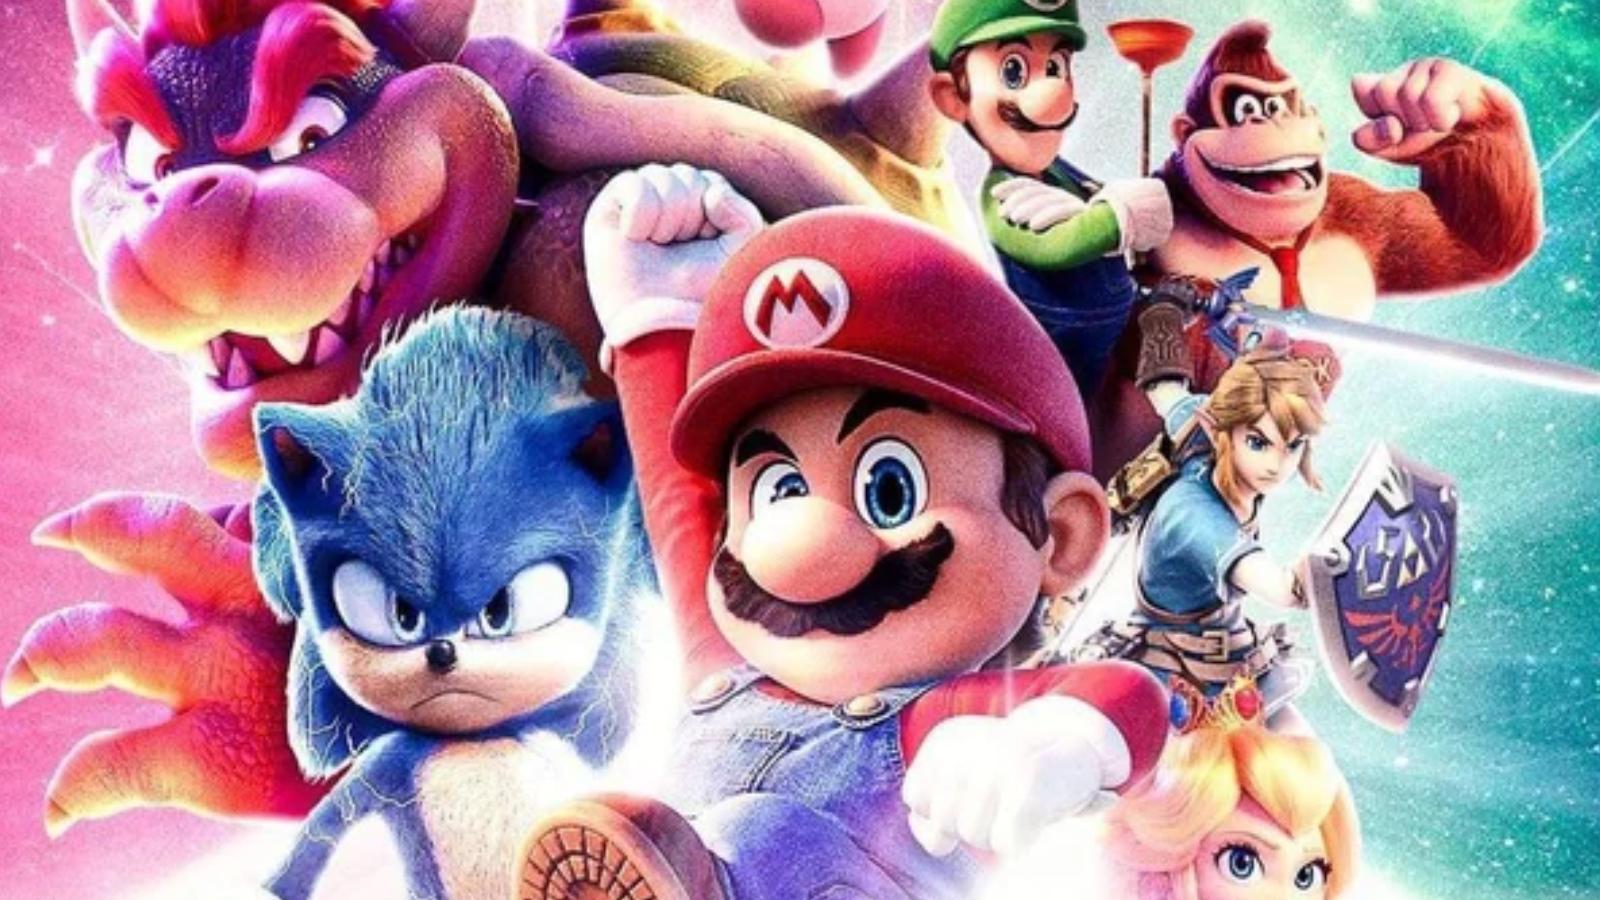 How to watch Super Mario Bros Movie – is it streaming? - Dexerto